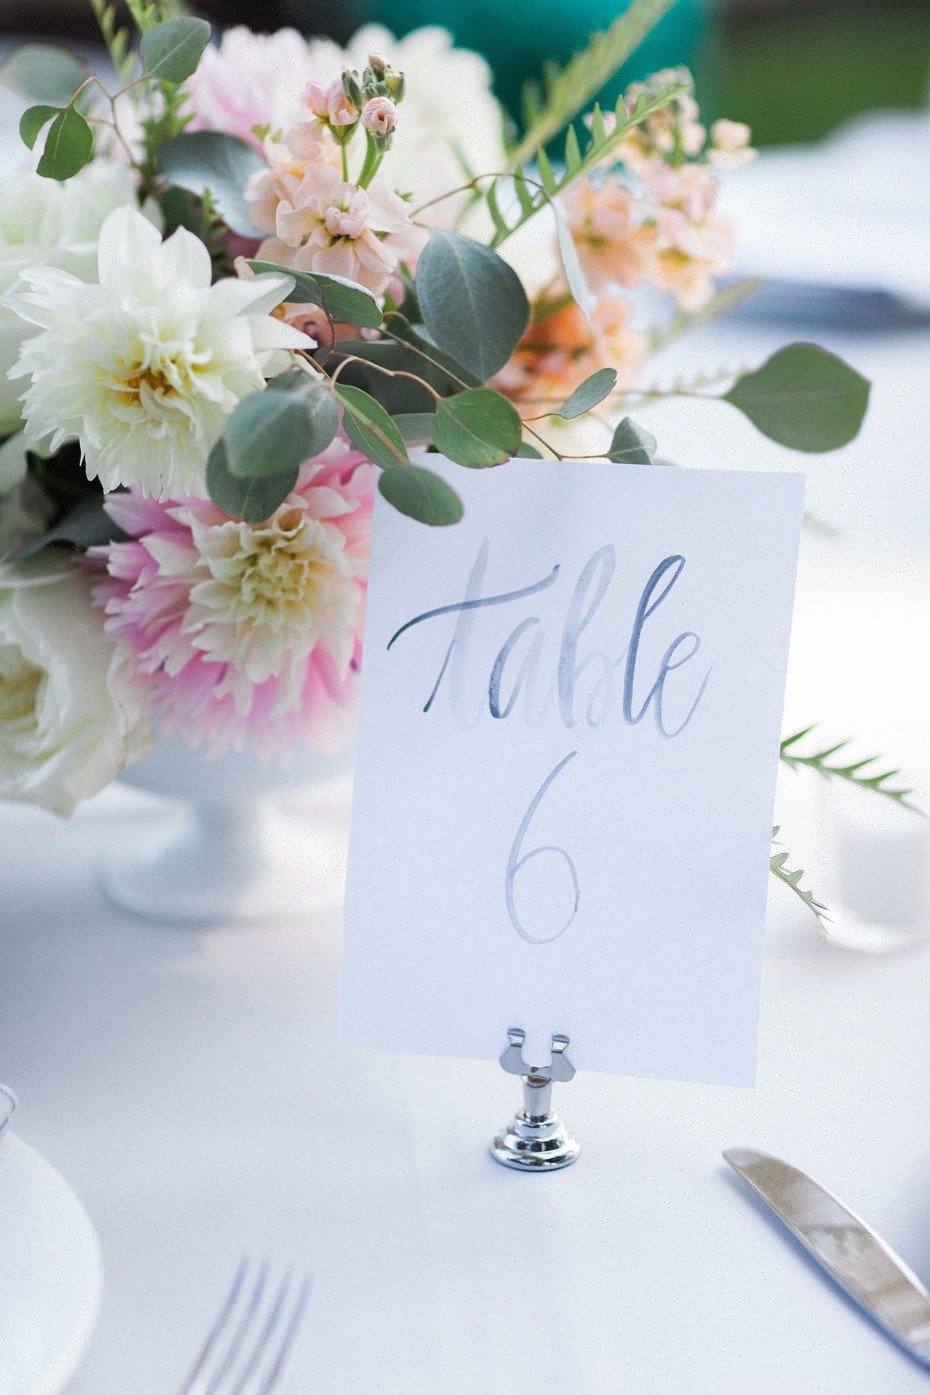 Watercolor table numbers